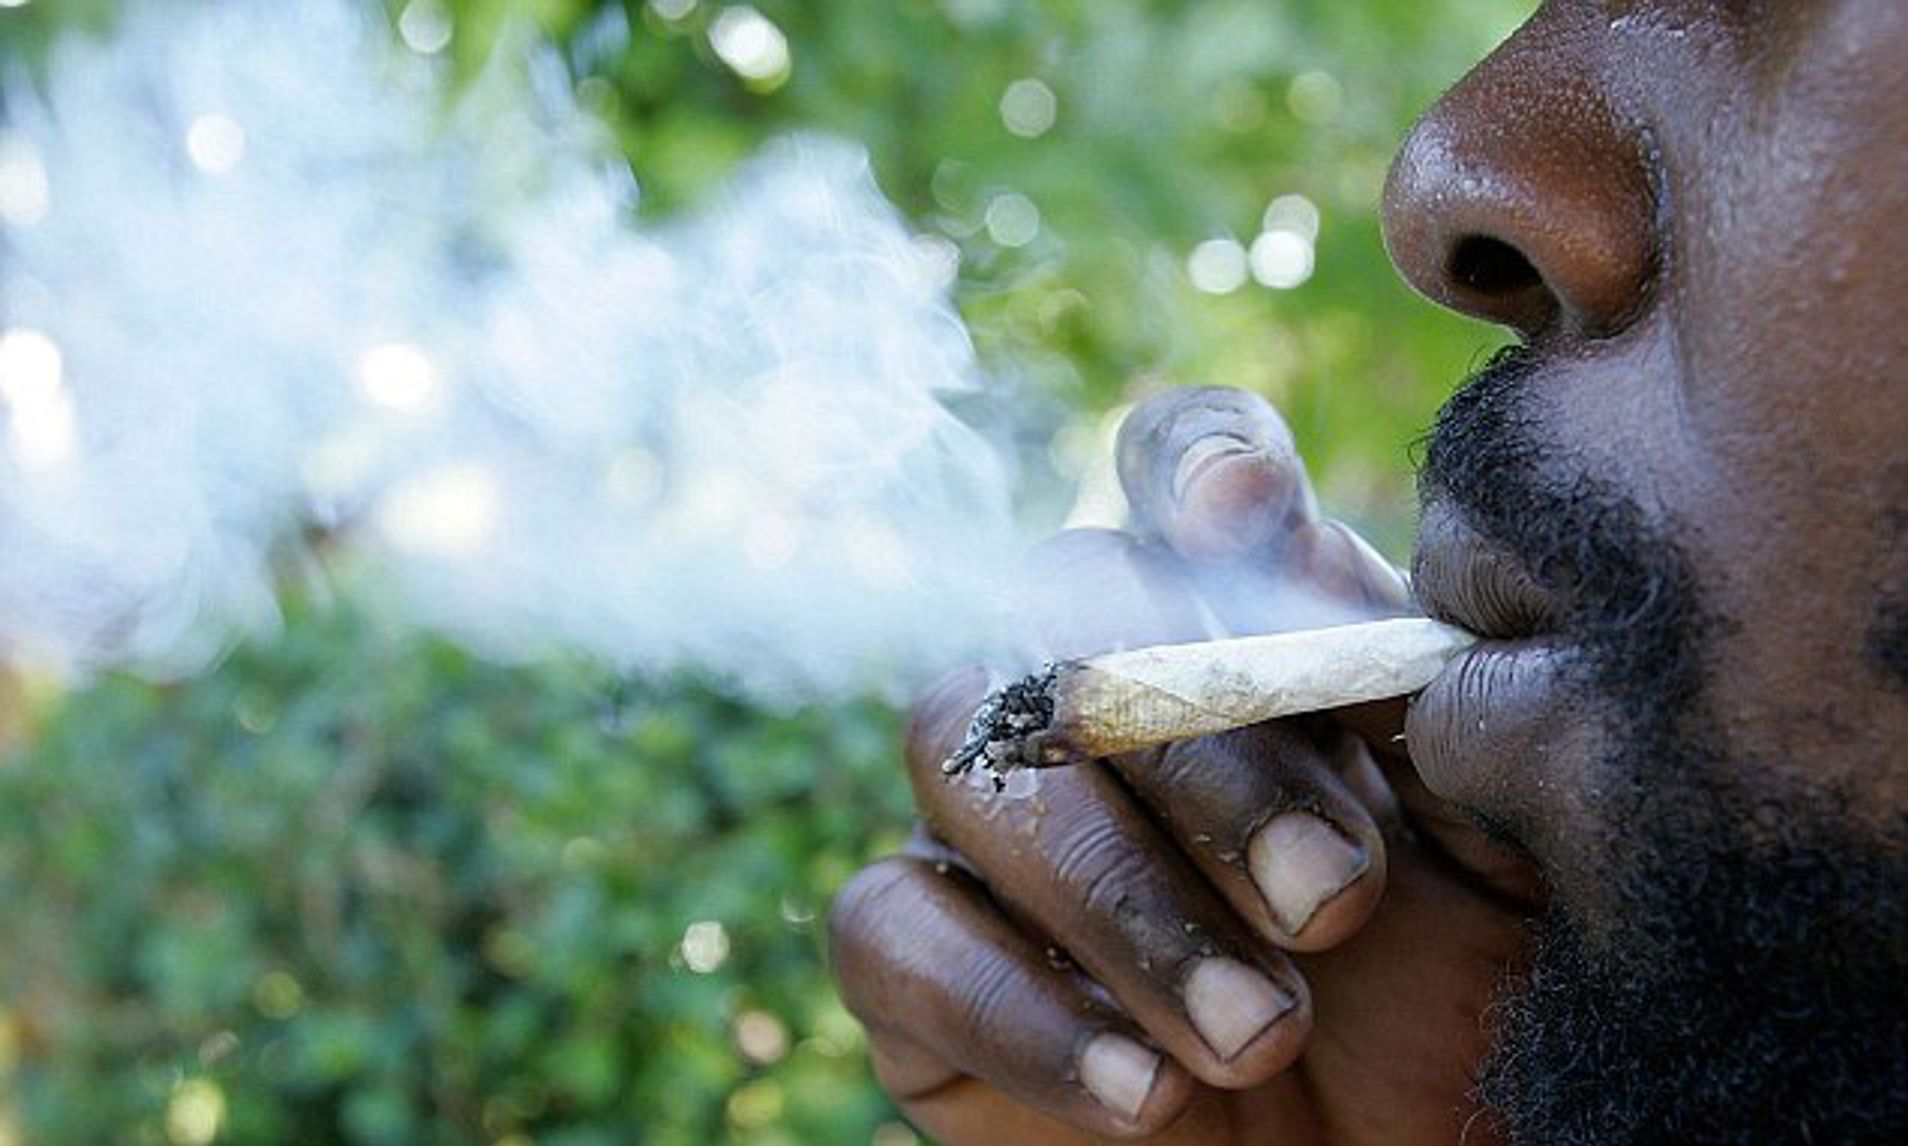 Bad Weather and COVID Lockdowns Leave Jamaica Facing Major Weed Drought